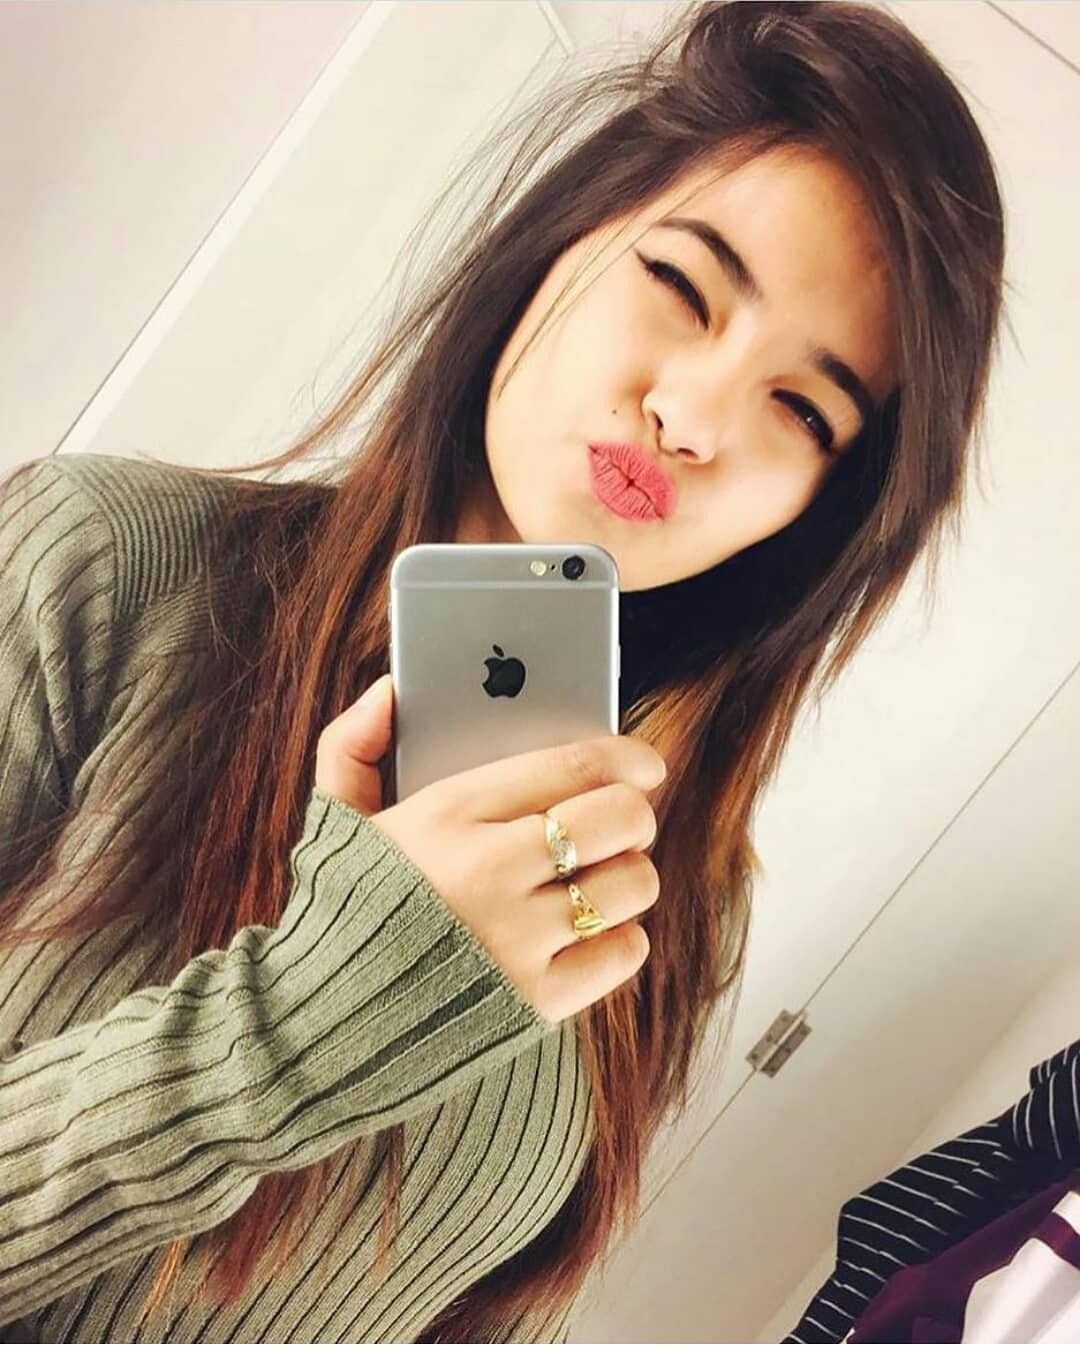 Beautiful Girl Selfie Images 1080p HD Best Pictures, Wallpapers & Photos  2023